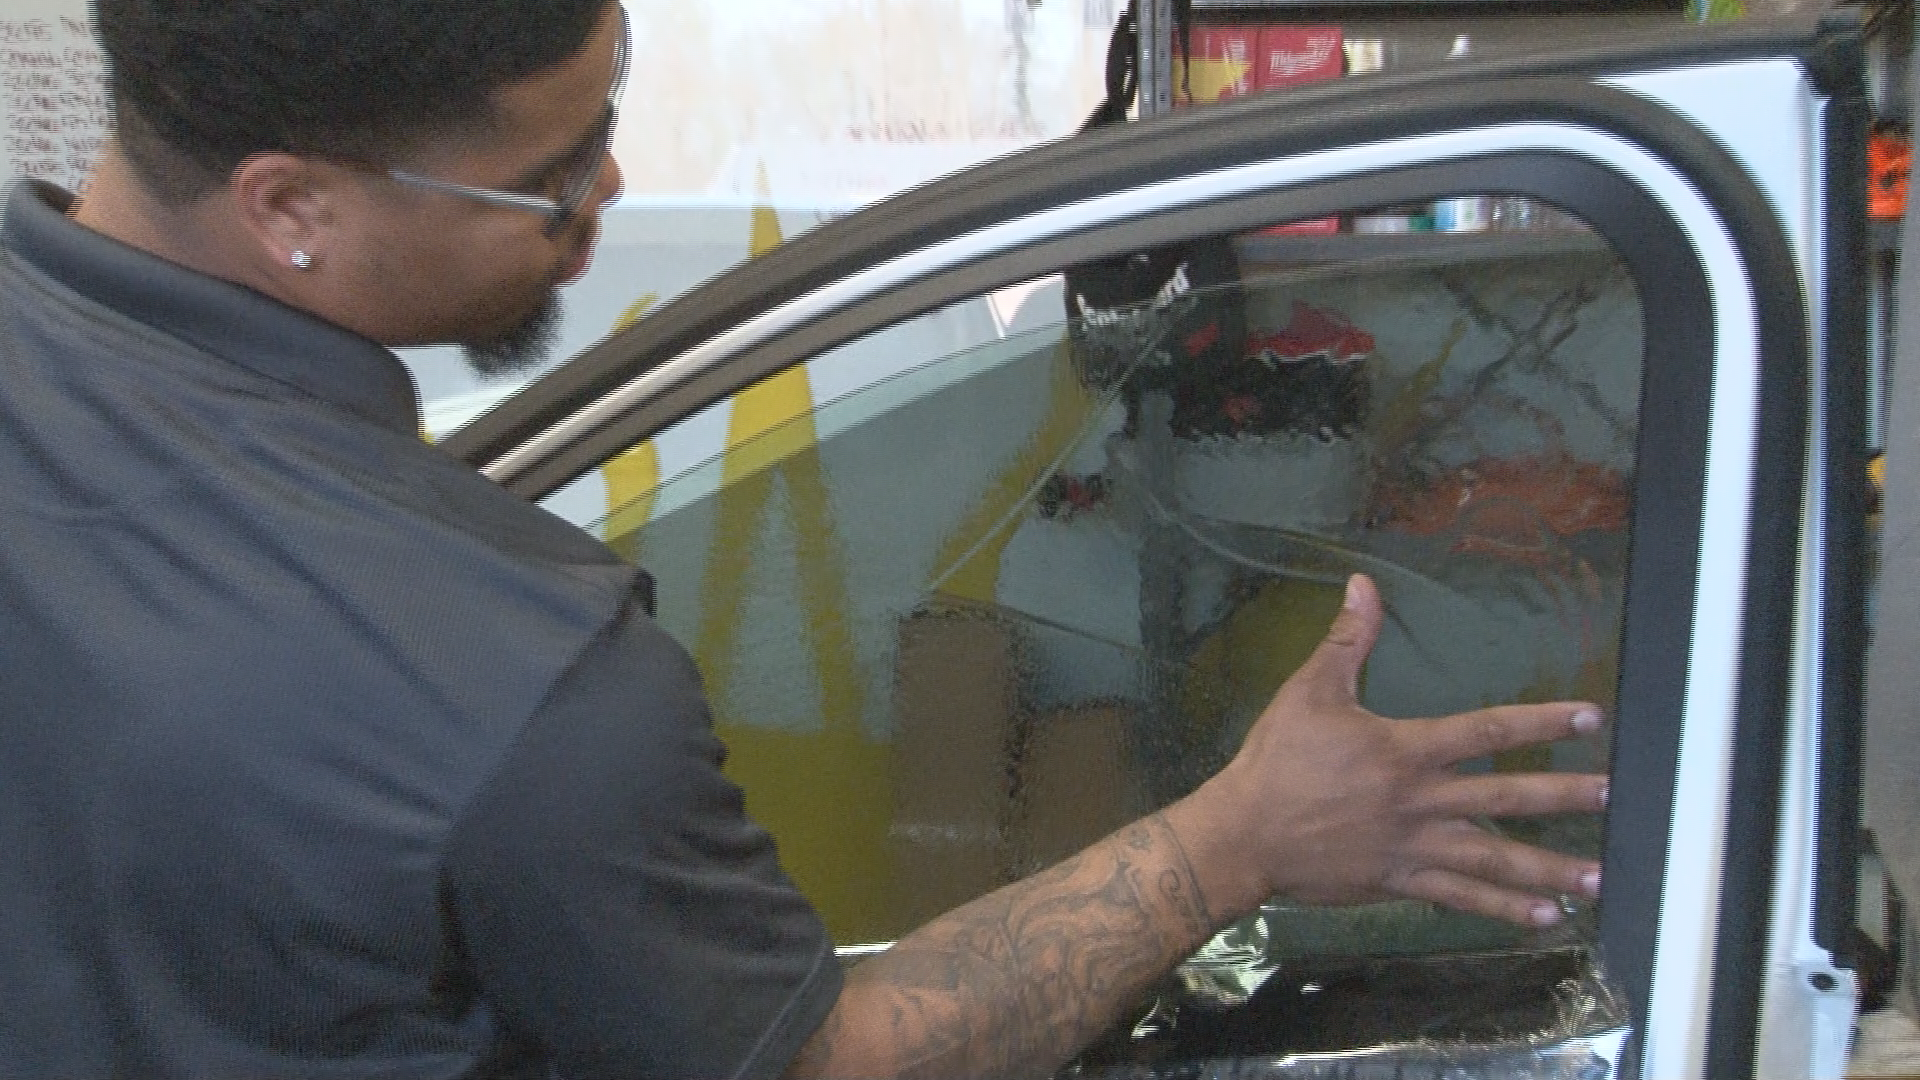 Tinted windows could attract attention from police officers | thv11.com